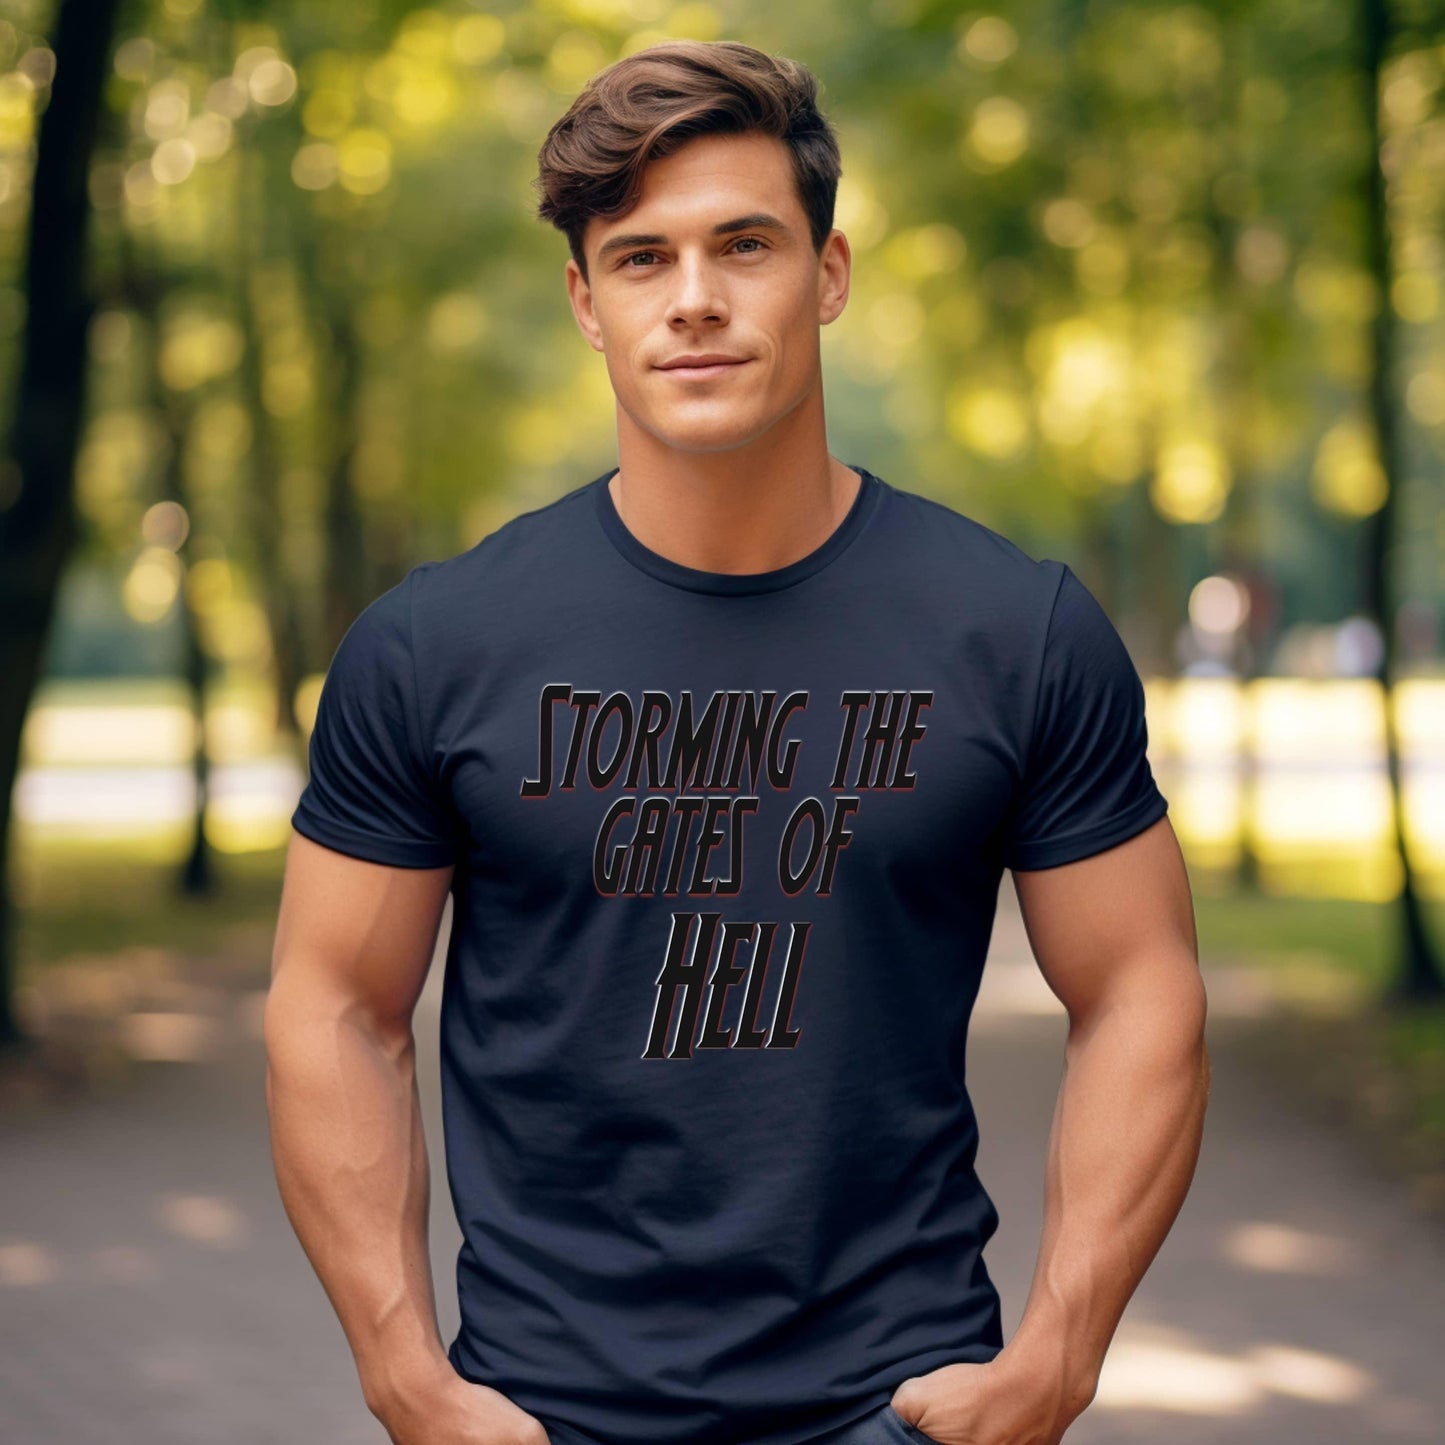 Storming The Gates Of Hell Pastor Edition Men’s Tee - JT Footprint Apparel